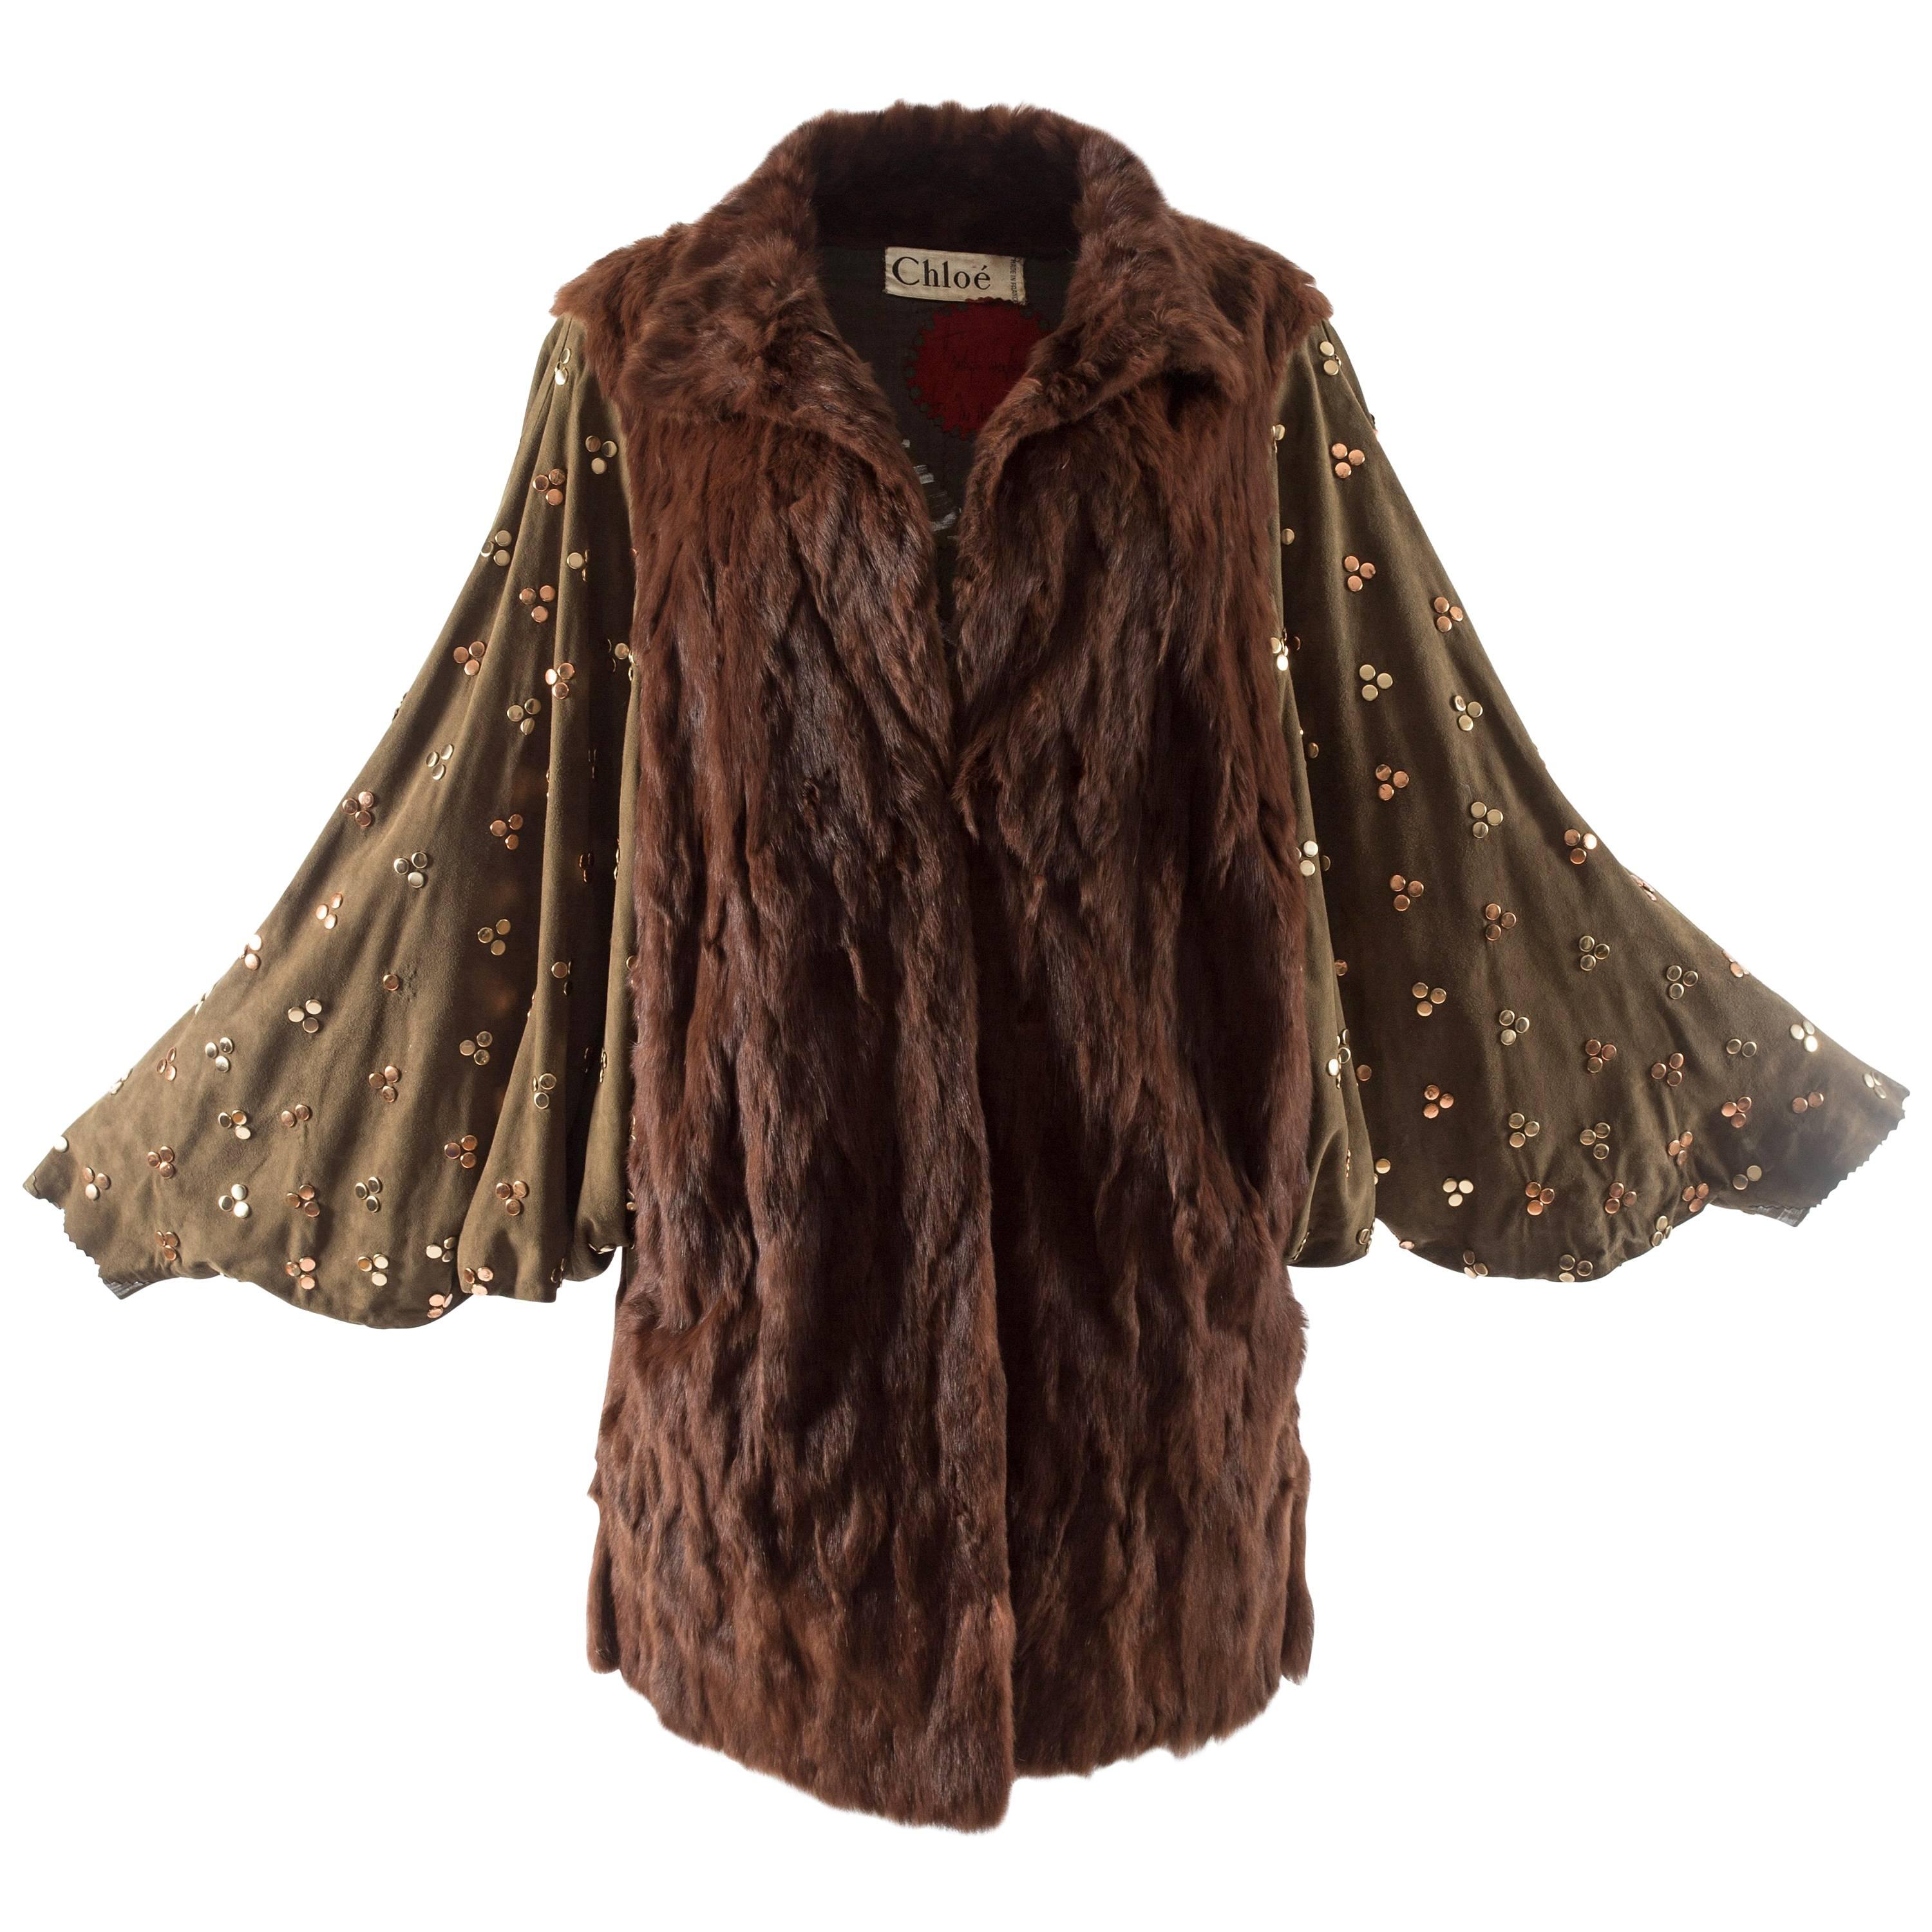 Chloe mink fur coat with studded suede batwing sleeves, circa 1980s